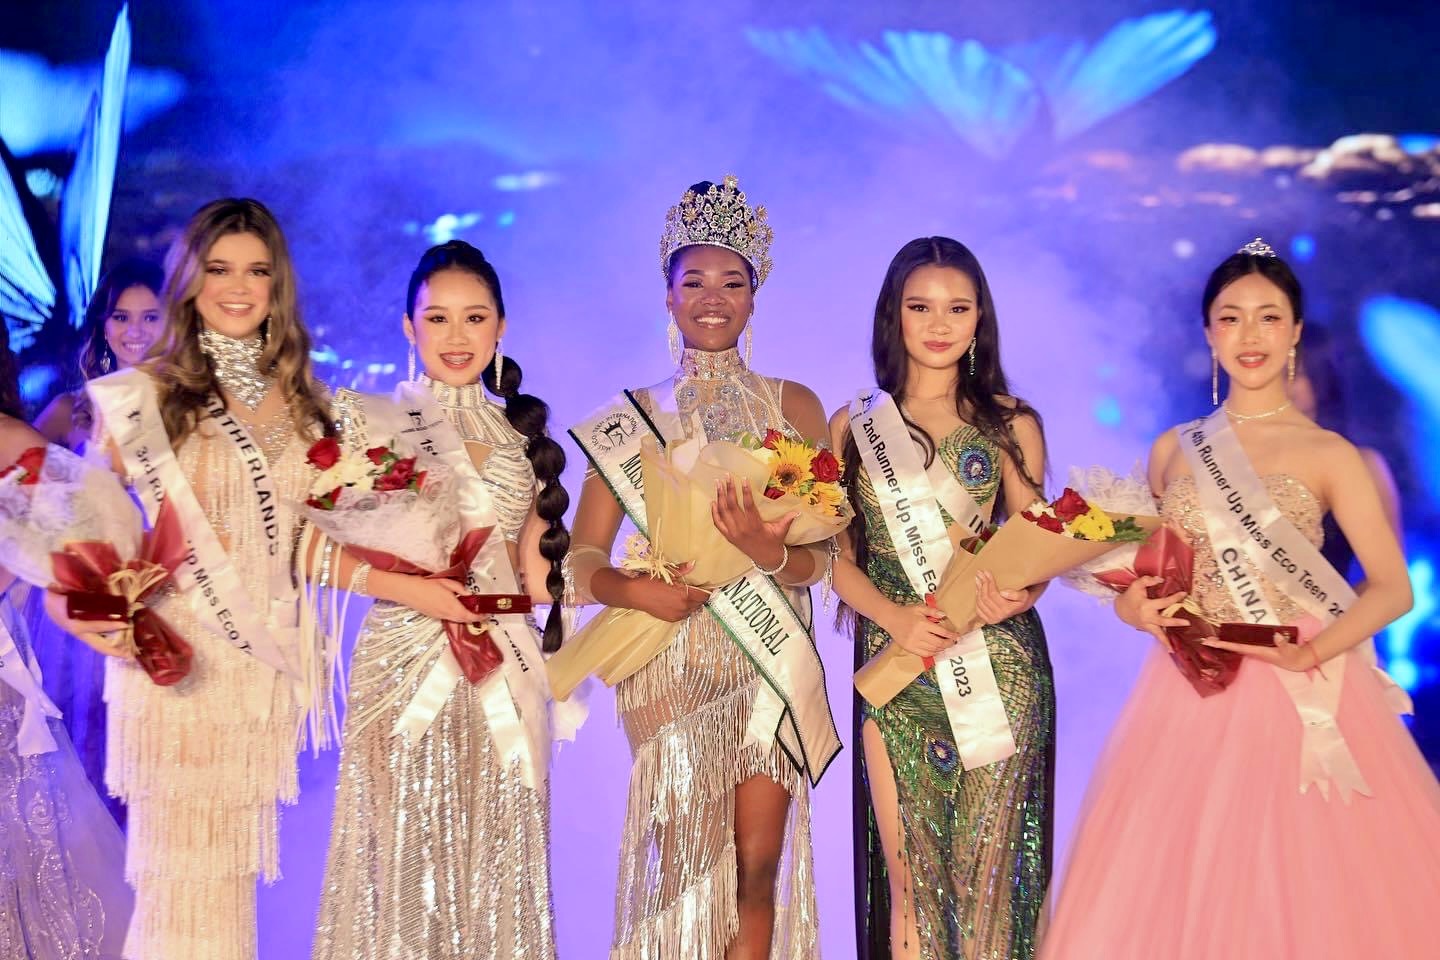 A 14-year-old student representing Vietnam was crowned Miss Eco Teen runner-up in Egypt - Photo 1.